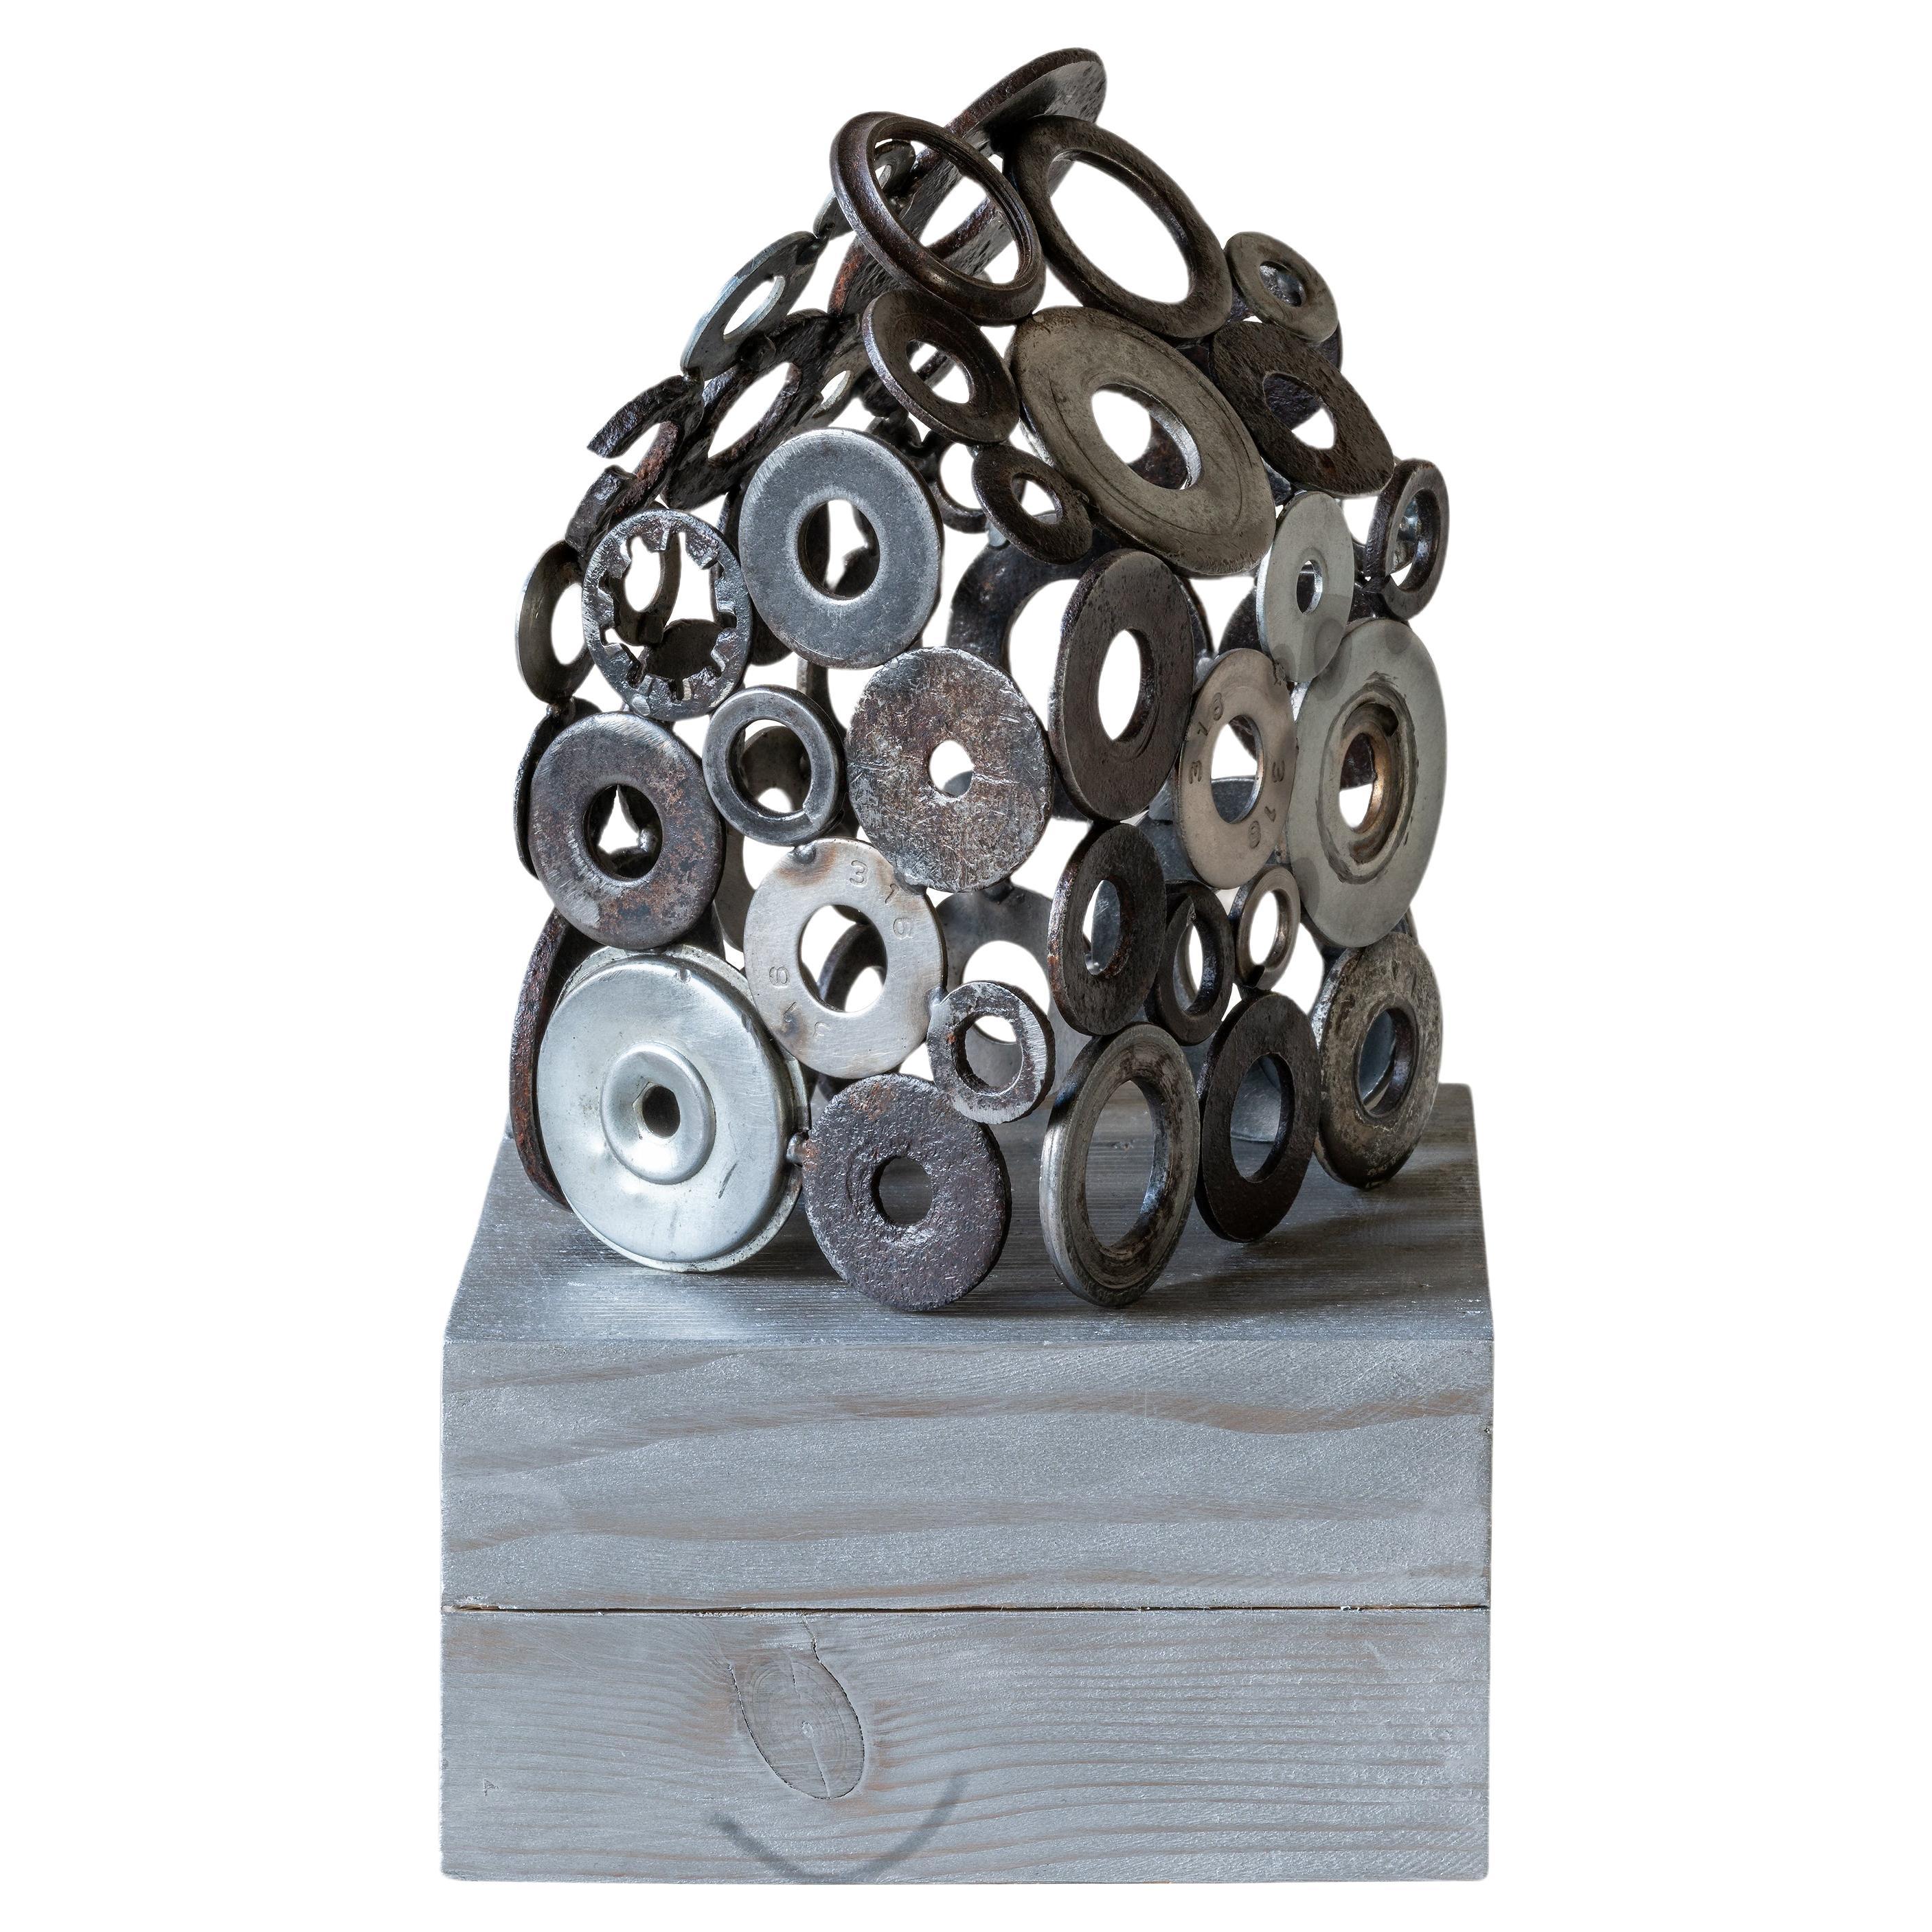 Jim Rose - Construct No. 02, Salvaged Steel and Aluminum Industrial Objects